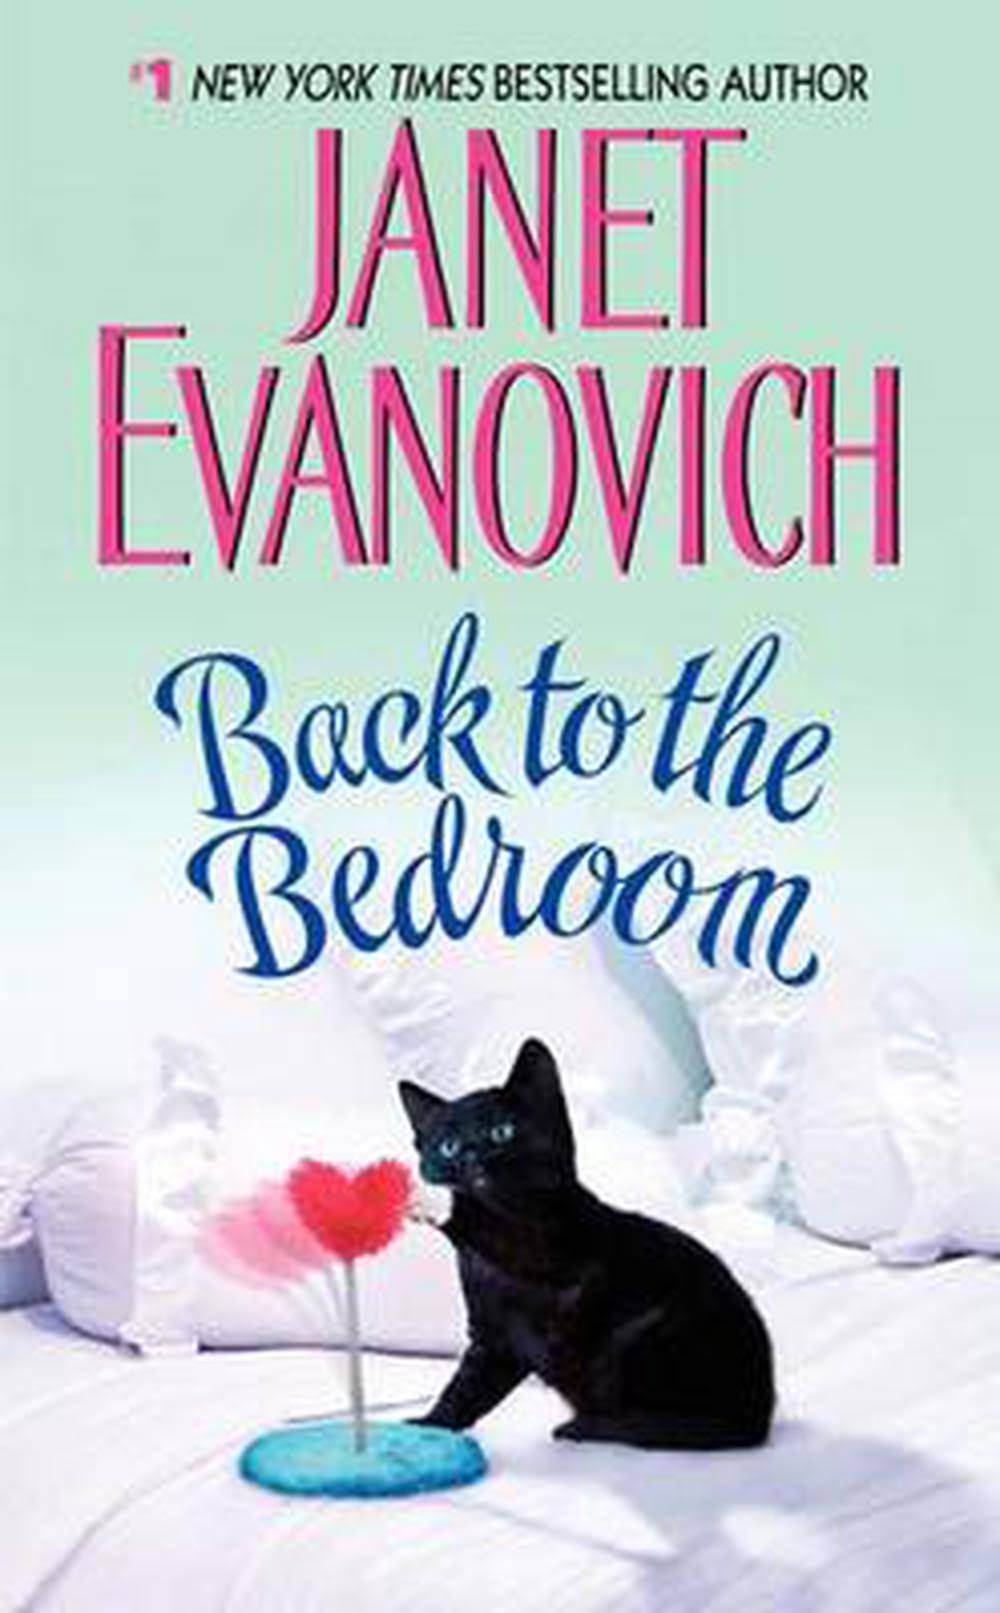 Back To The Bedroom - Janet Evanovich